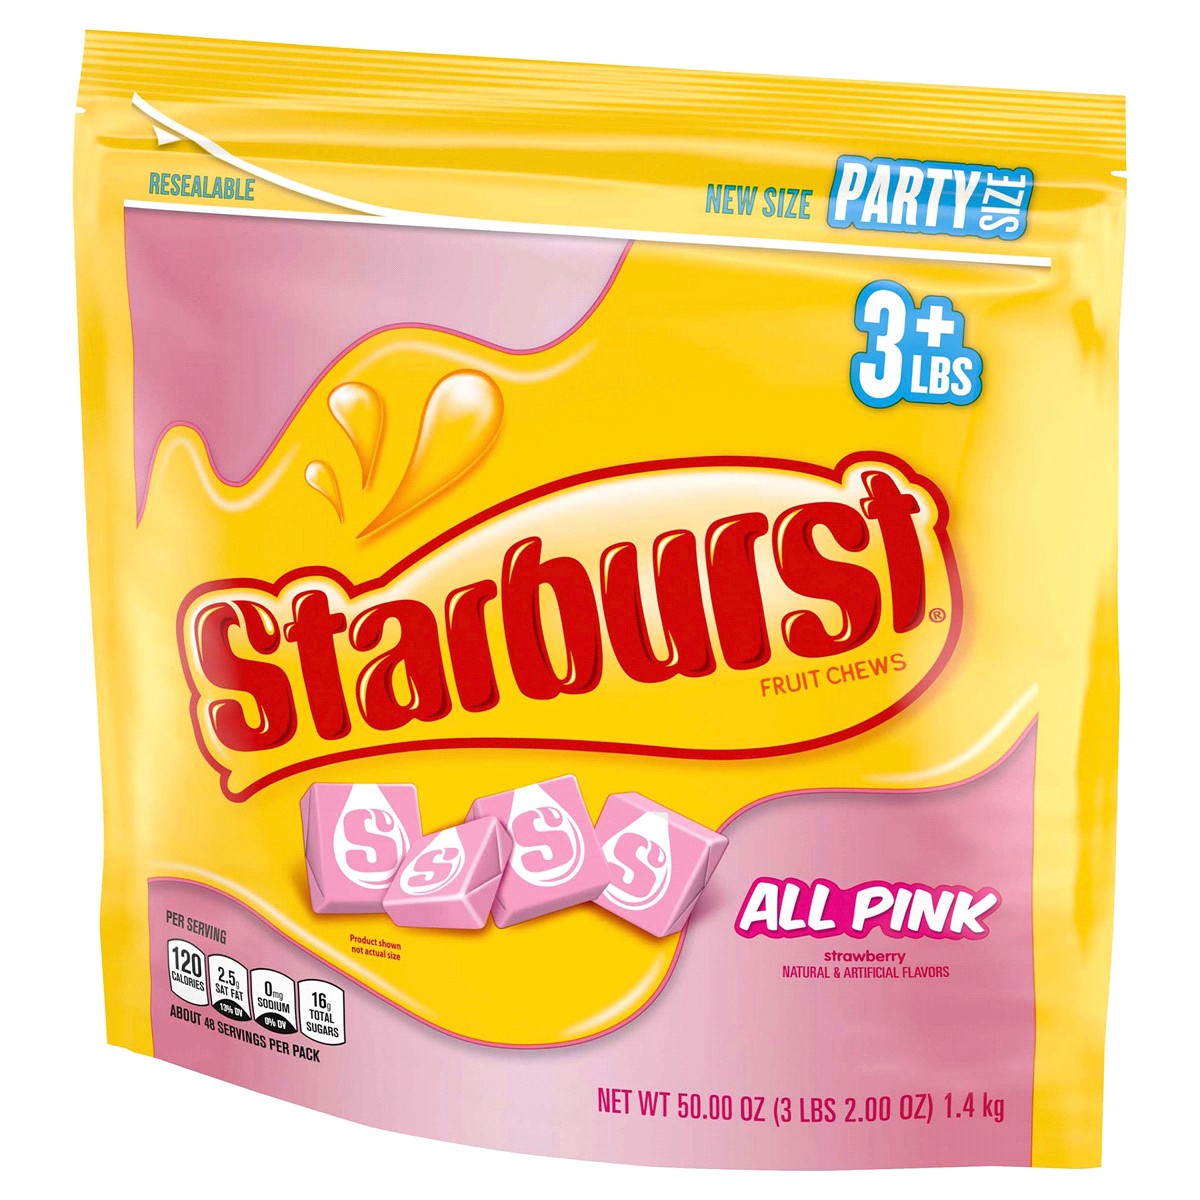 slide 10 of 29, STARBURST All Pink Fruit Chews Chewy Candy, Party Size, 50 oz Bag, 50 oz